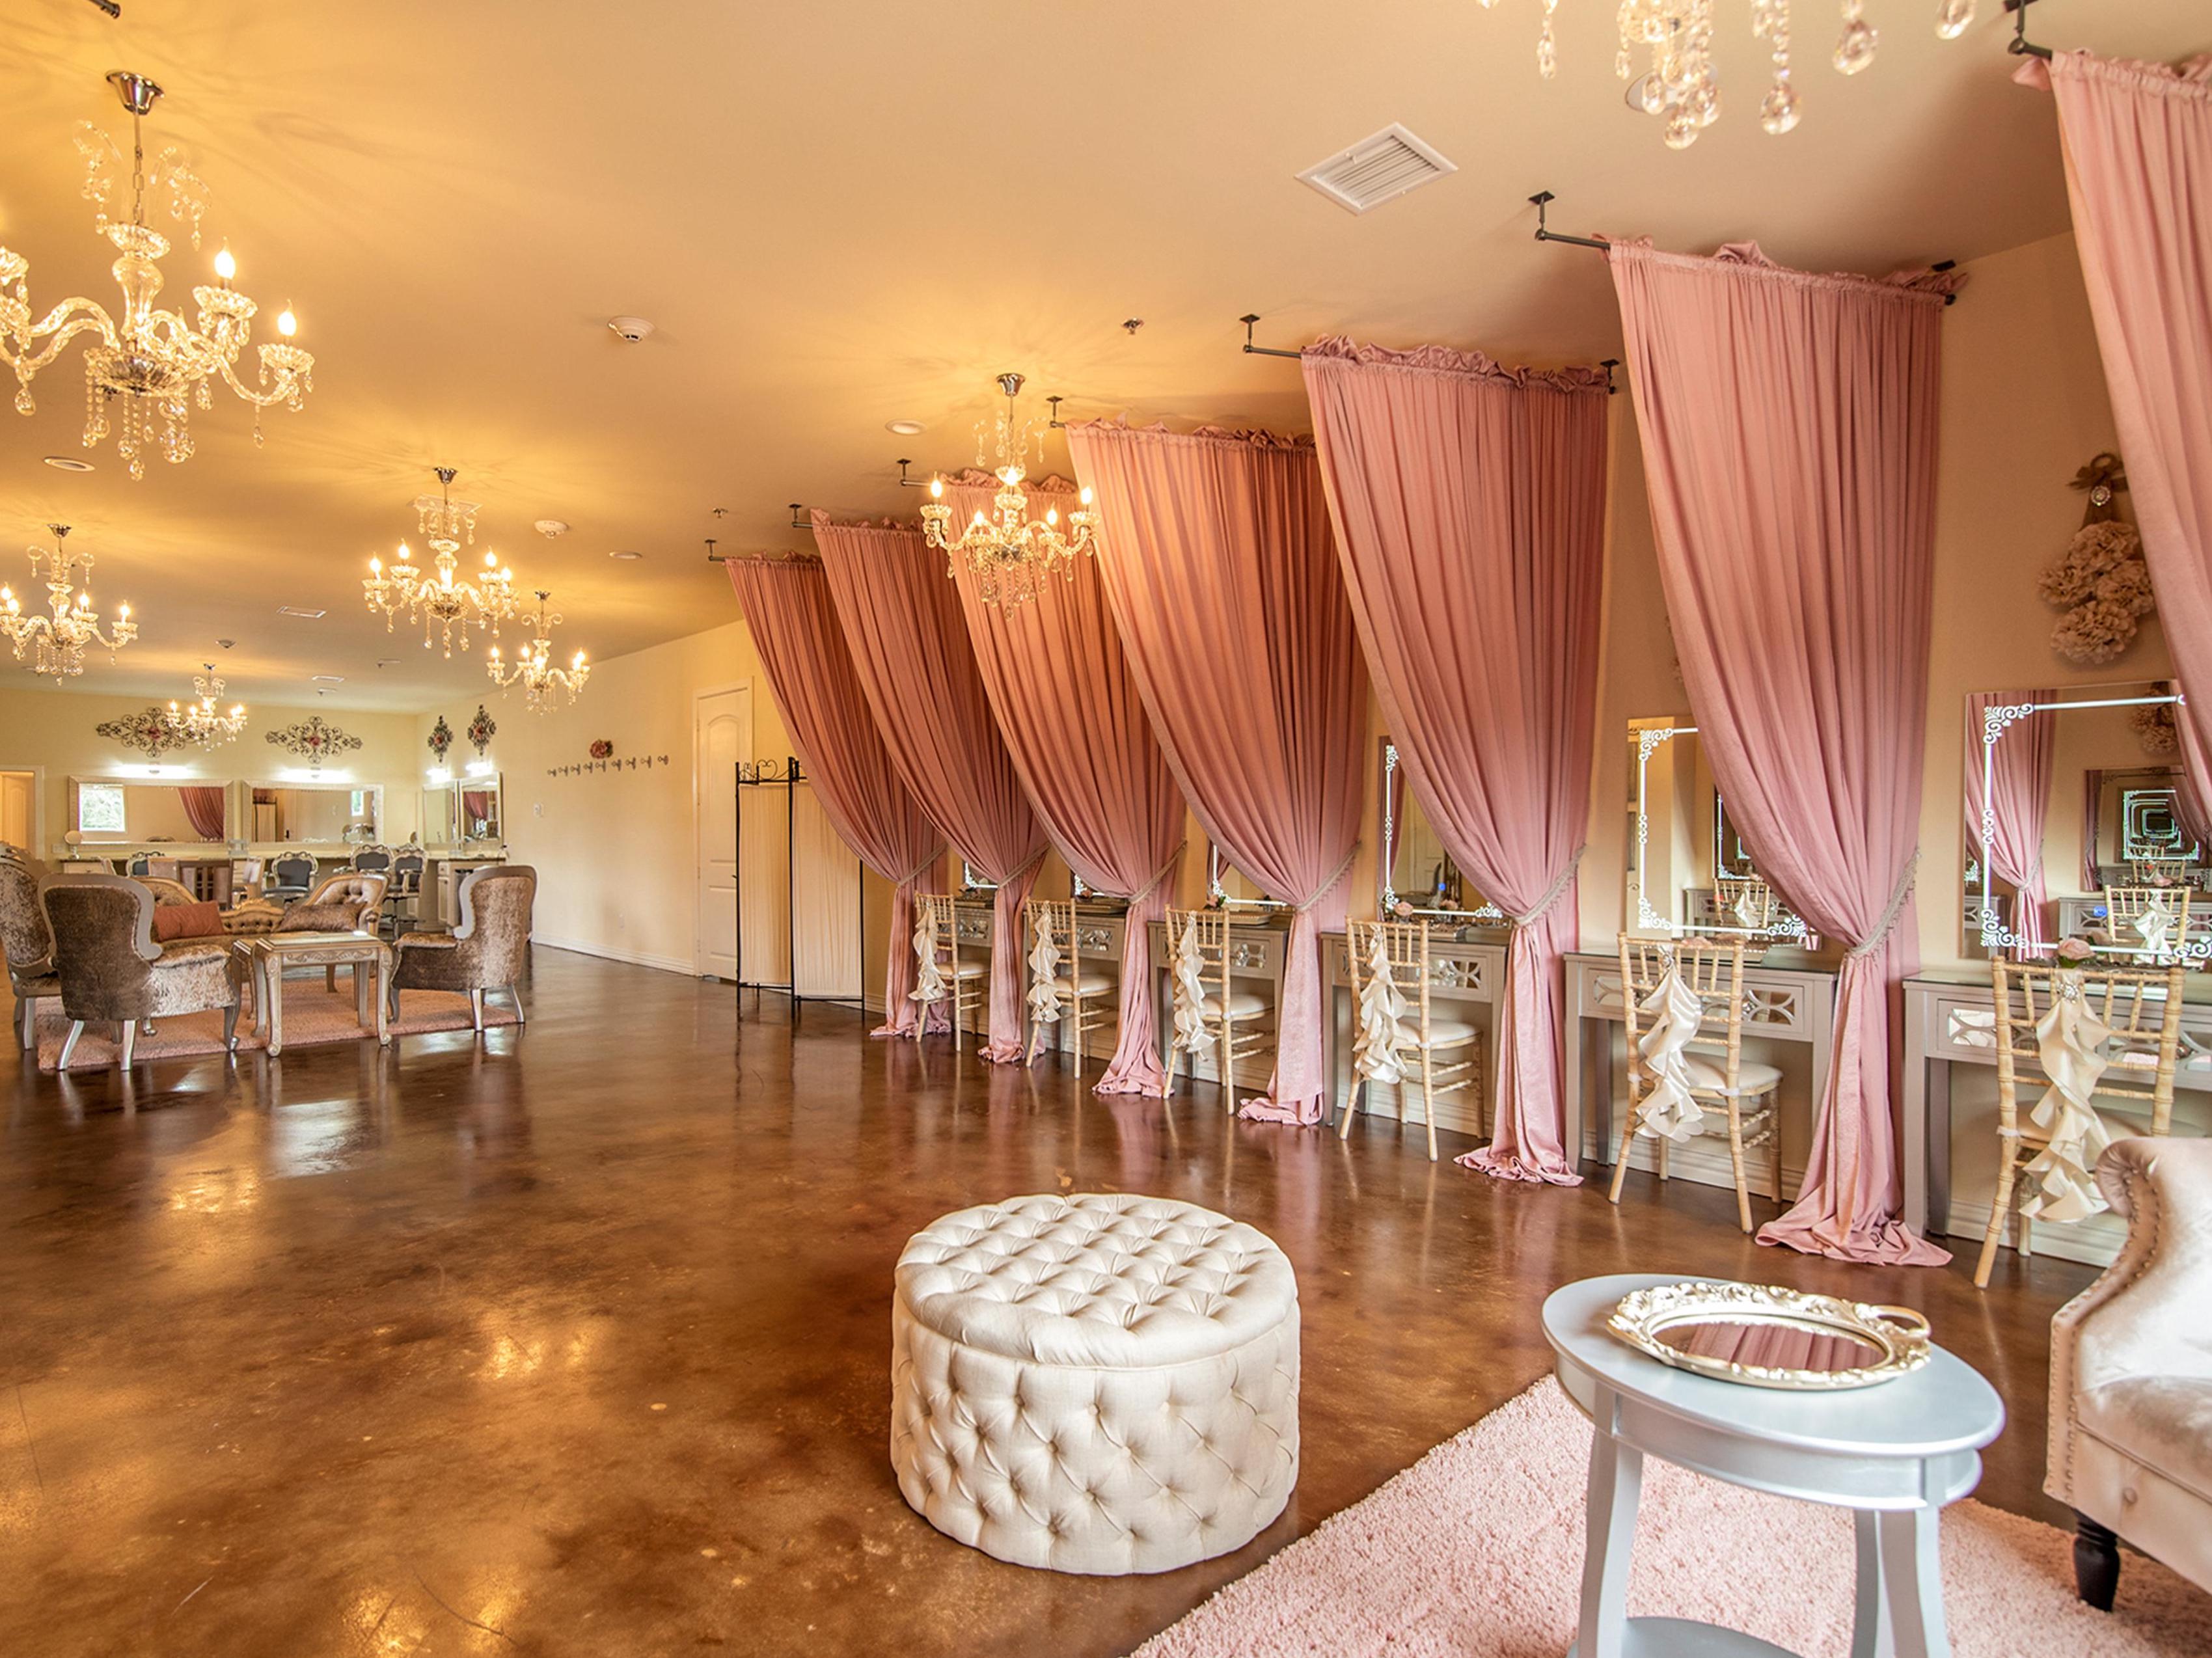 The bridal suite in The Hundred Oaks wedding venue has crystal chandeliers and mauve pink drapes with several vanities on the right side.